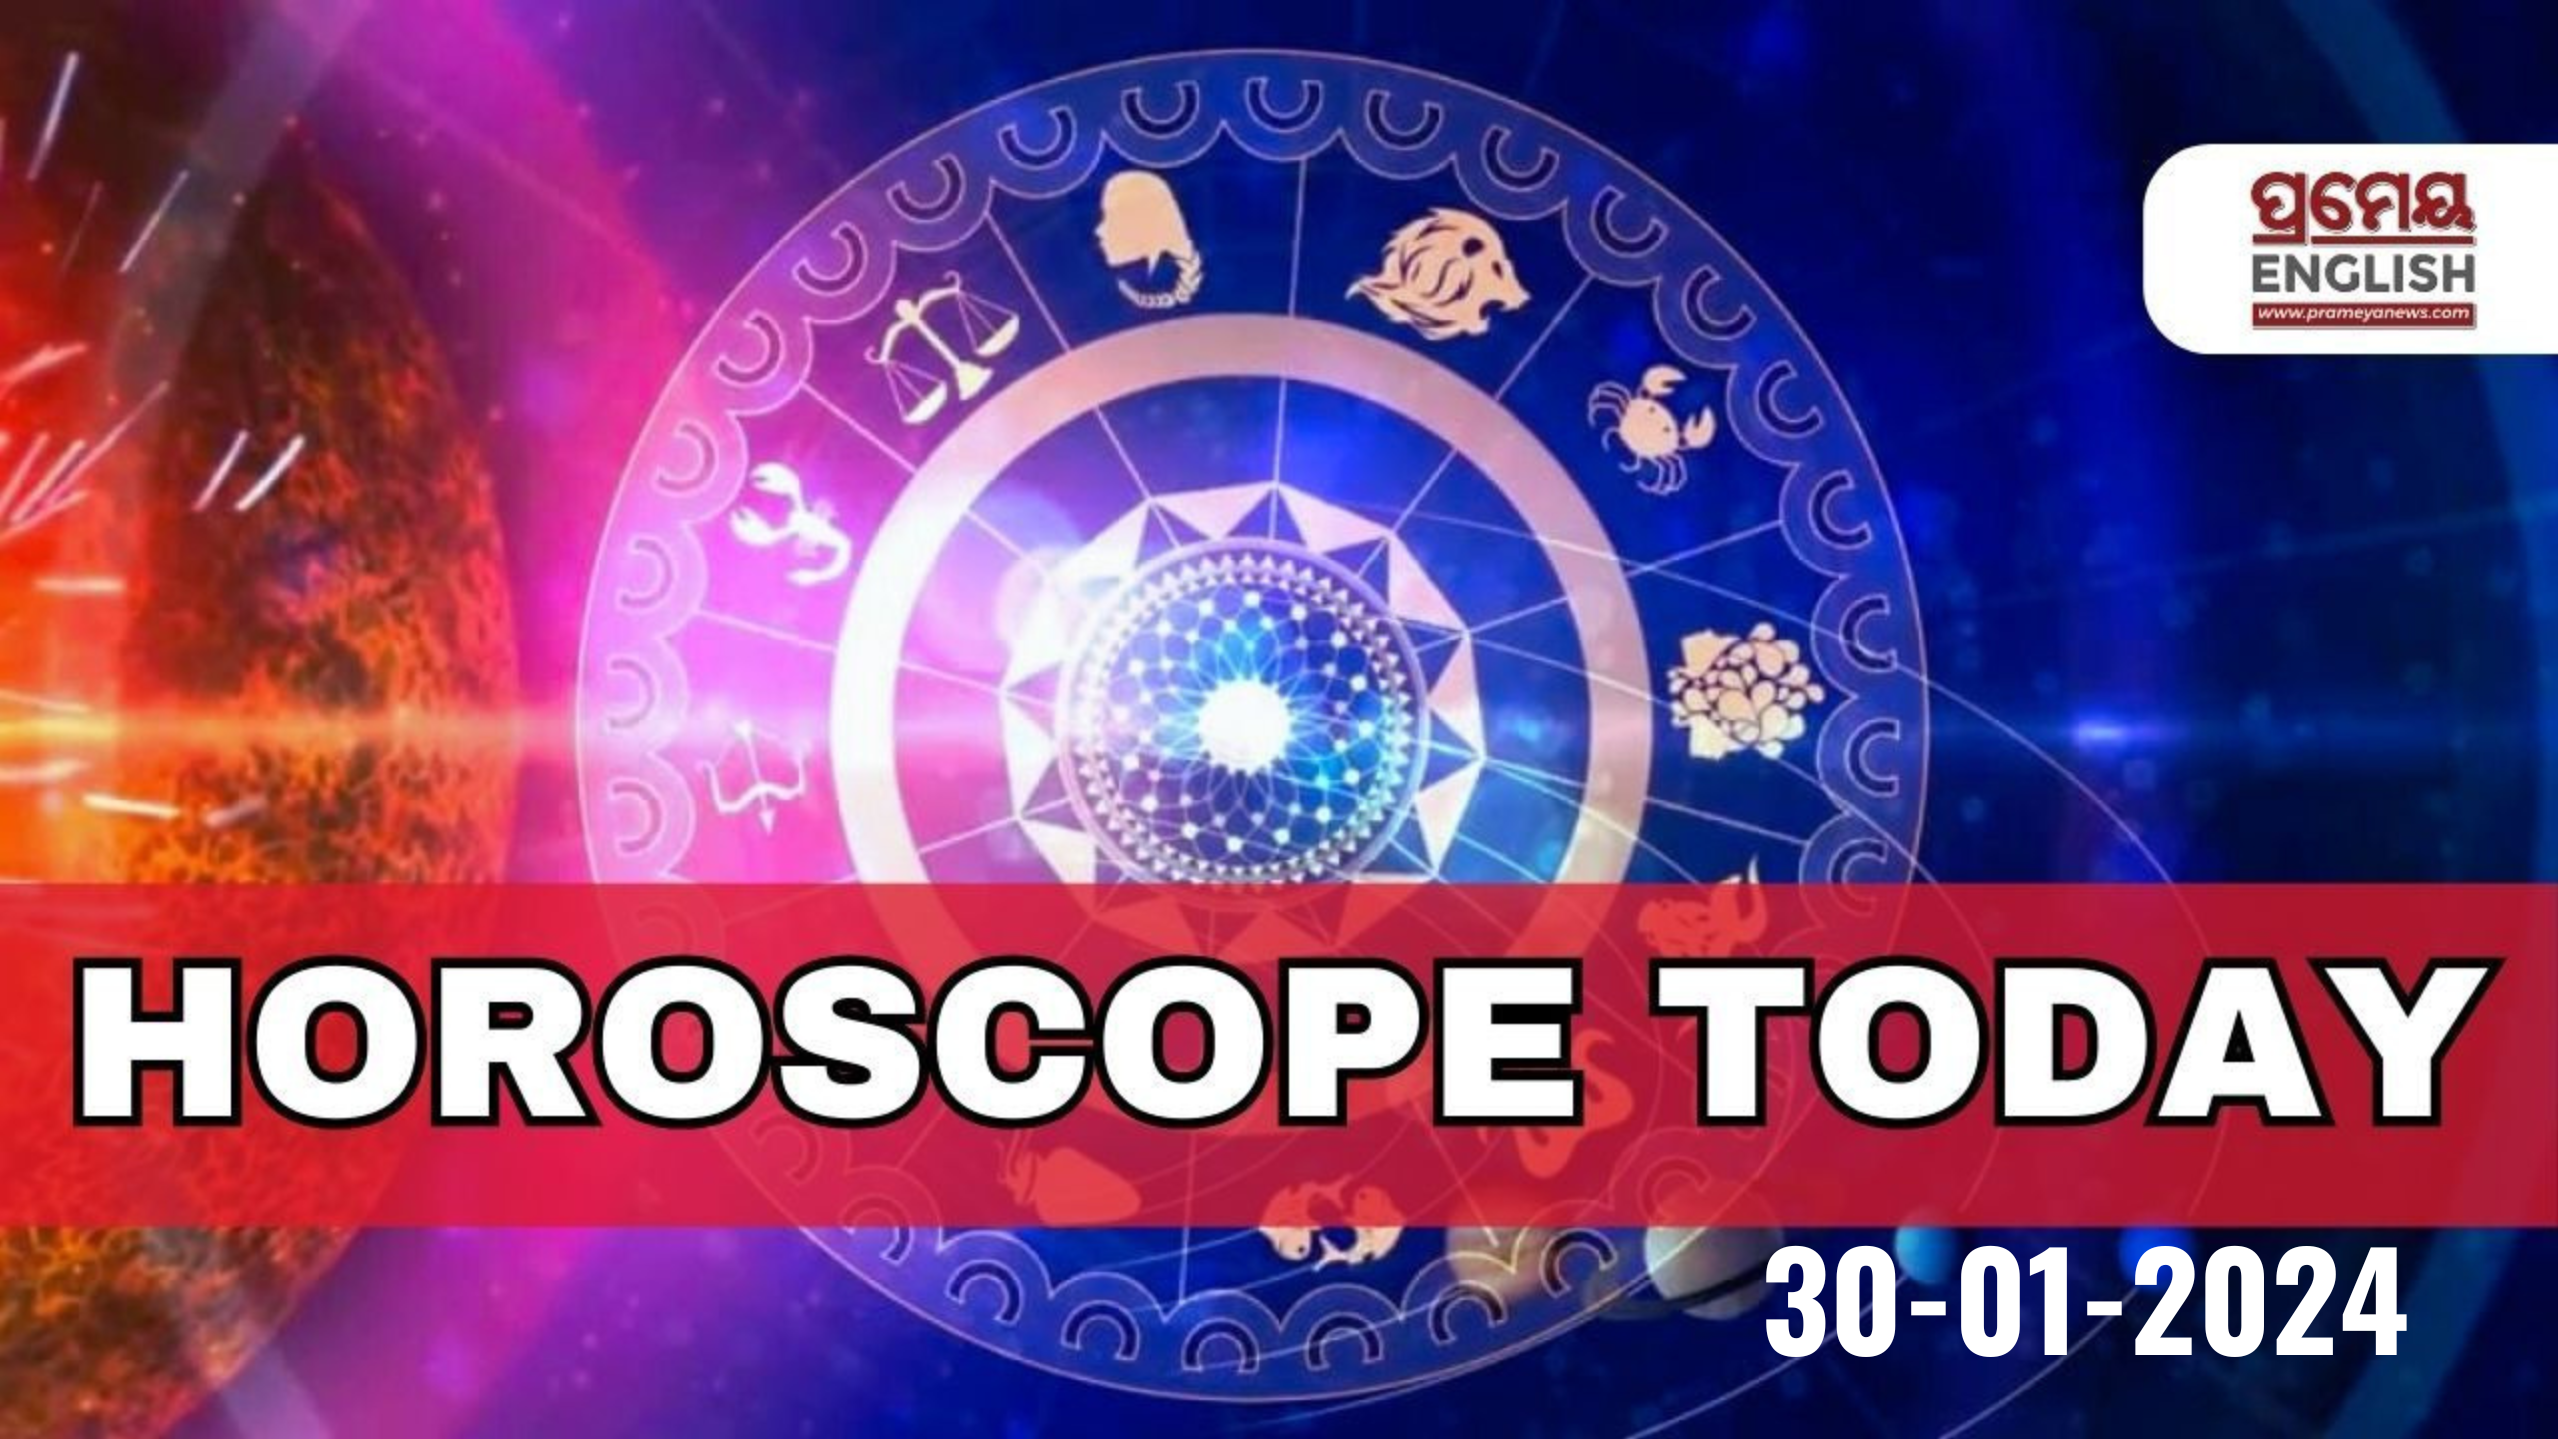 Horoscope Today: Astrological prediction for January 25, 2024